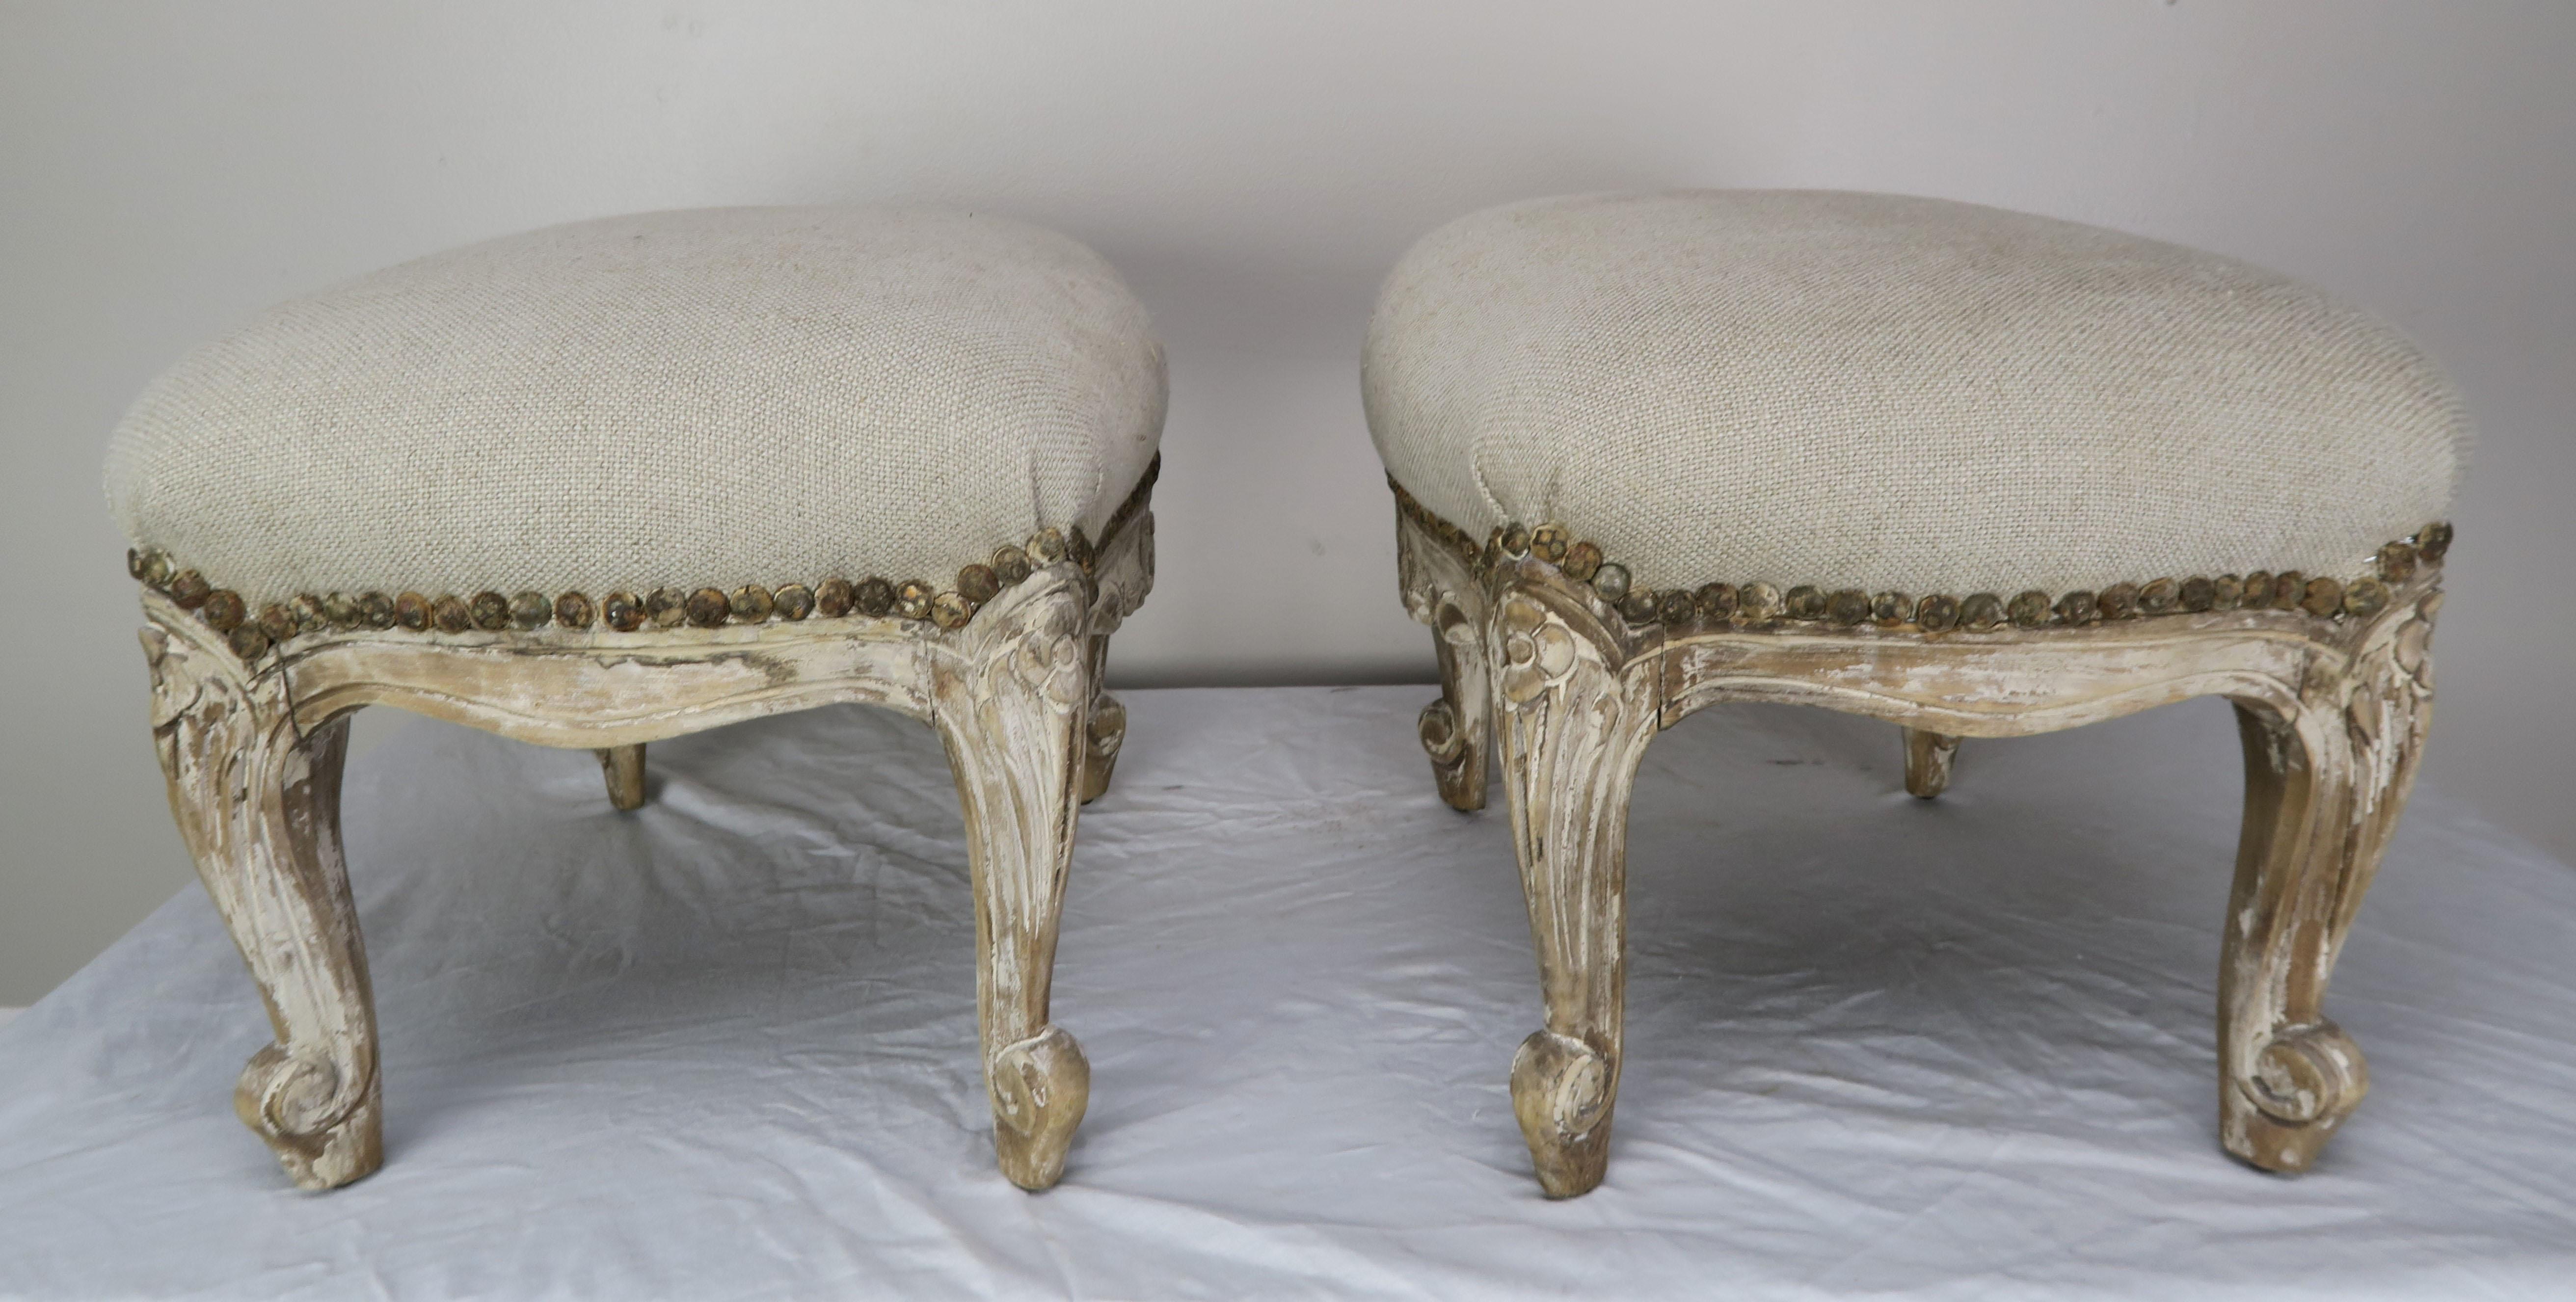 Linen 19th Century French Painted Benches/Footstools, Pair